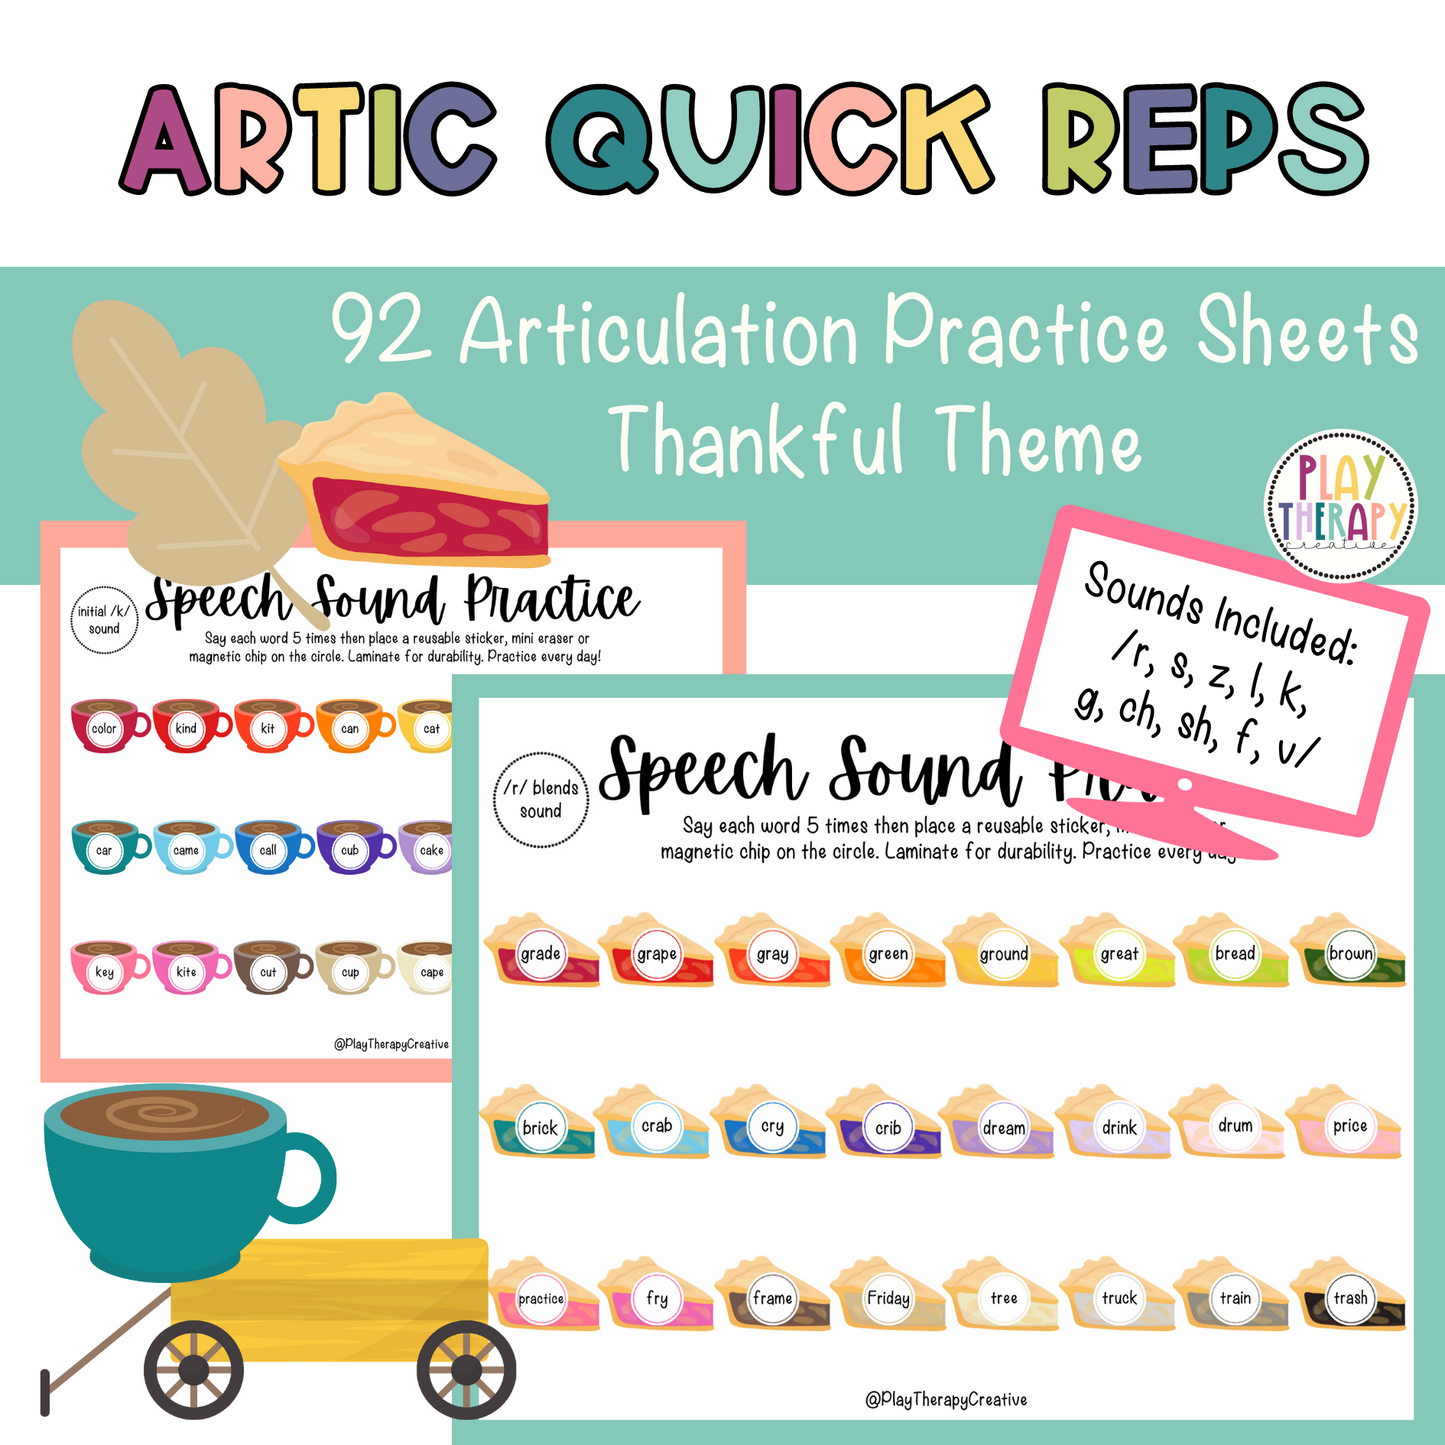 Artic Quick Reps- Thankful Theme